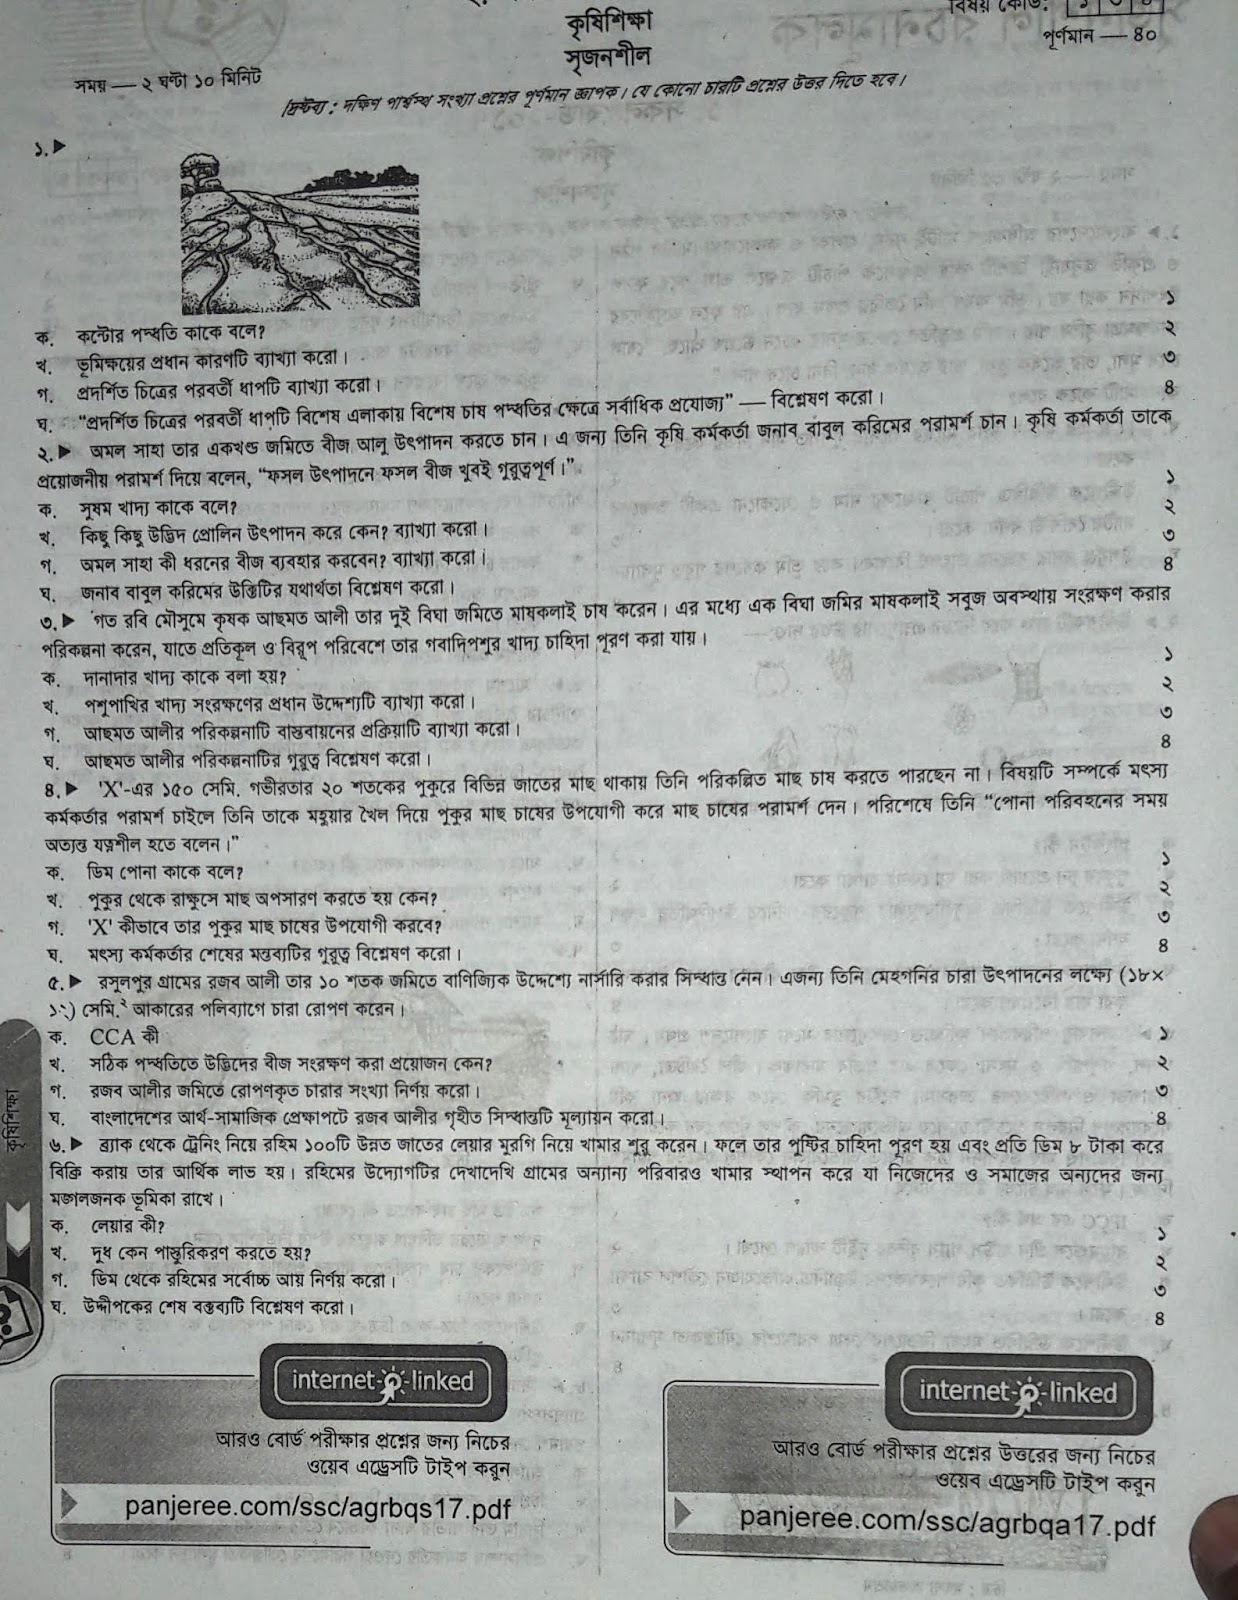 SSC Agriculture Studies suggestion, question paper, model question, mcq question, question pattern, syllabus for dhaka board, all boards